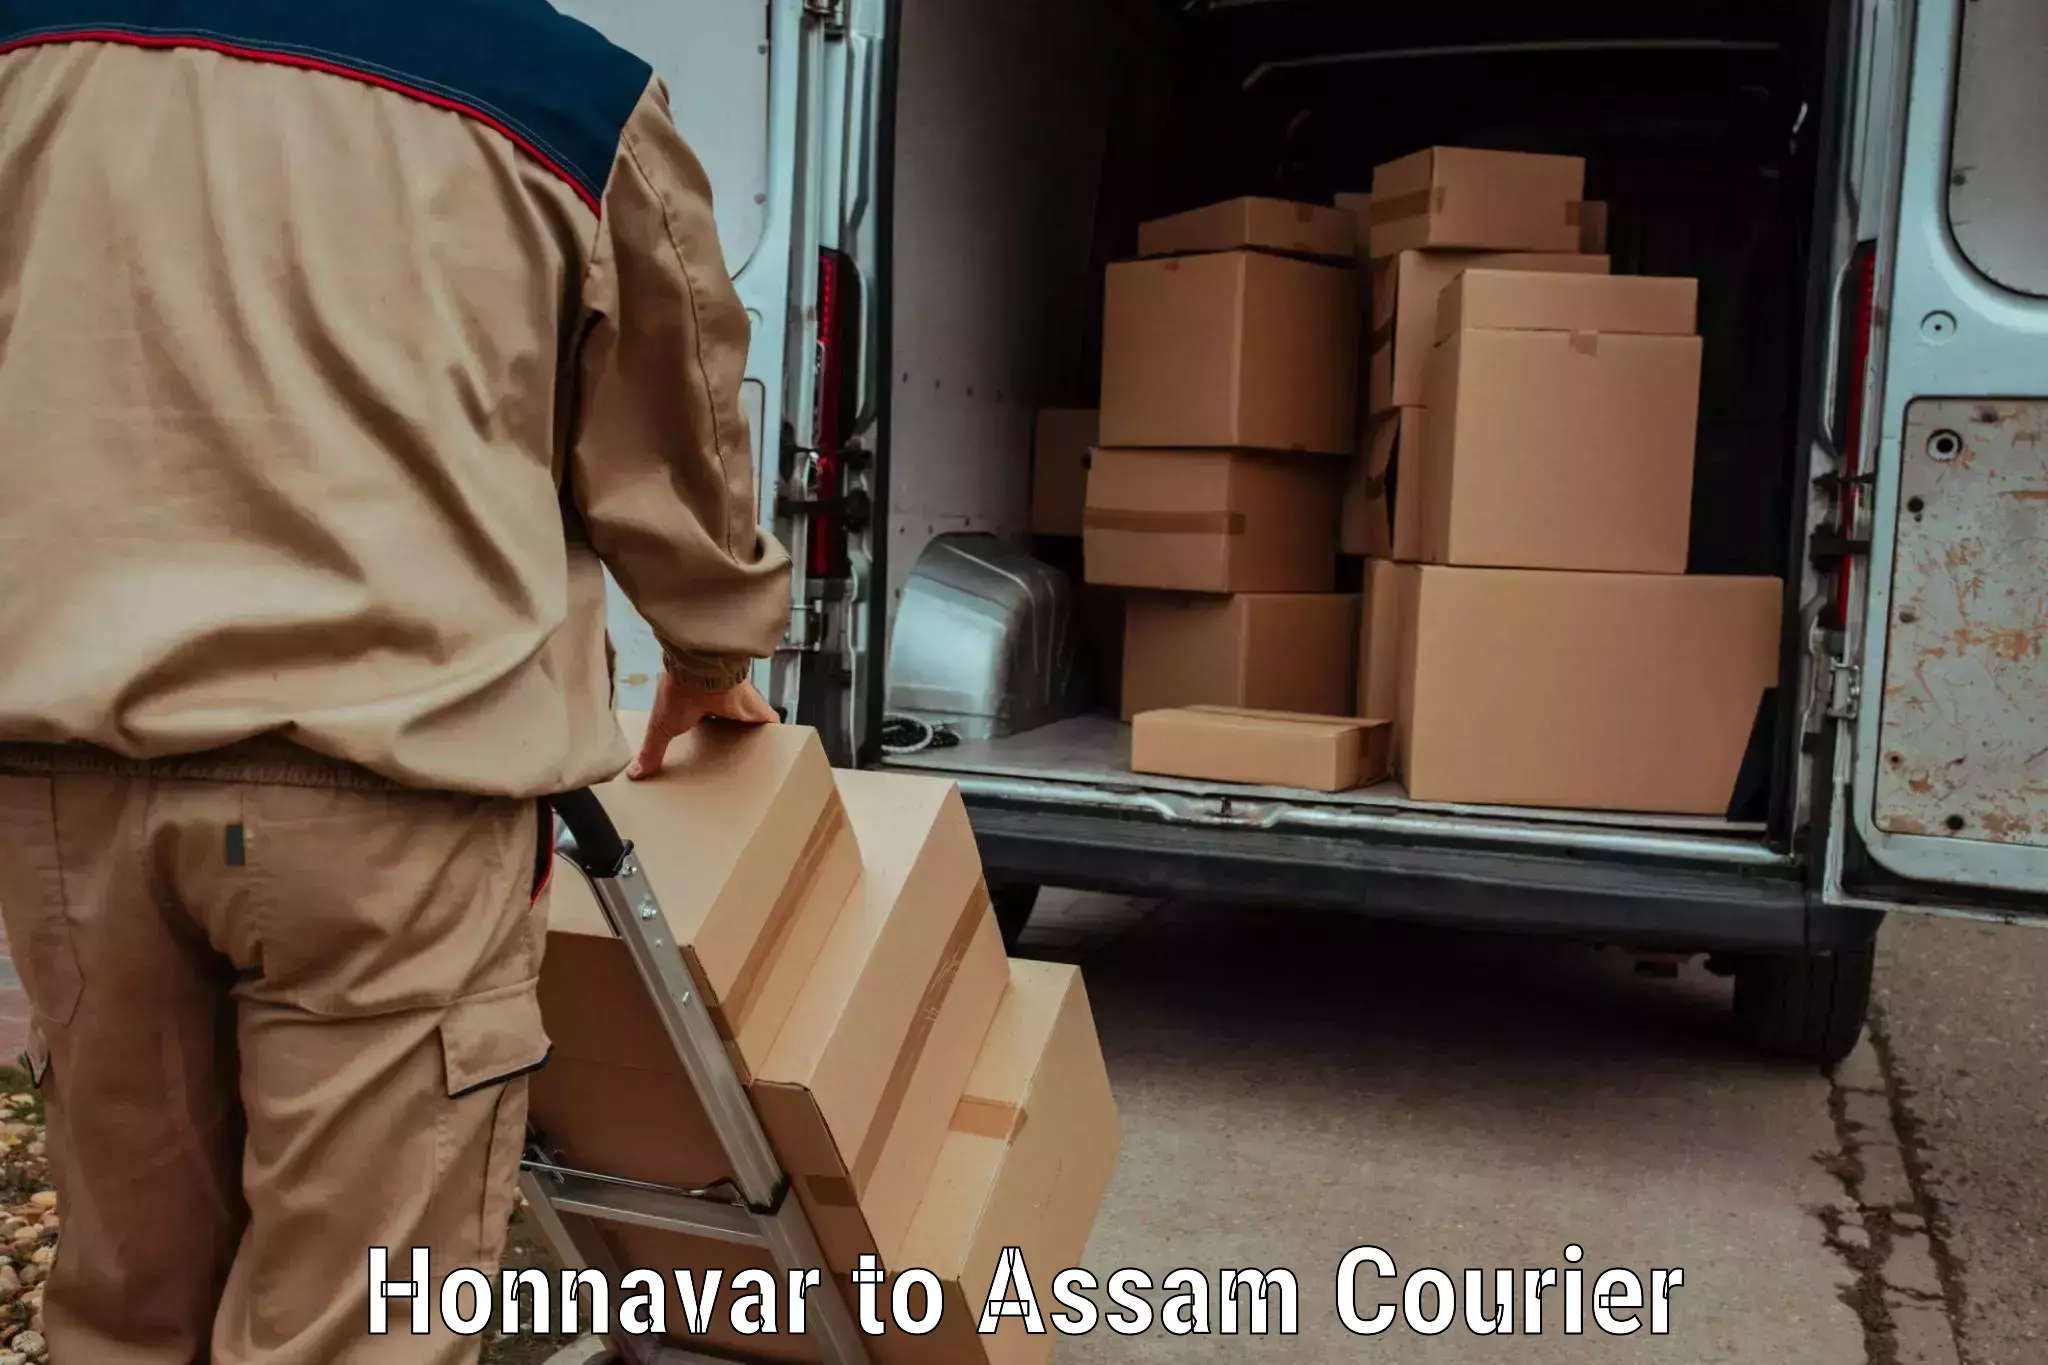 Secure package delivery in Honnavar to Lala Assam